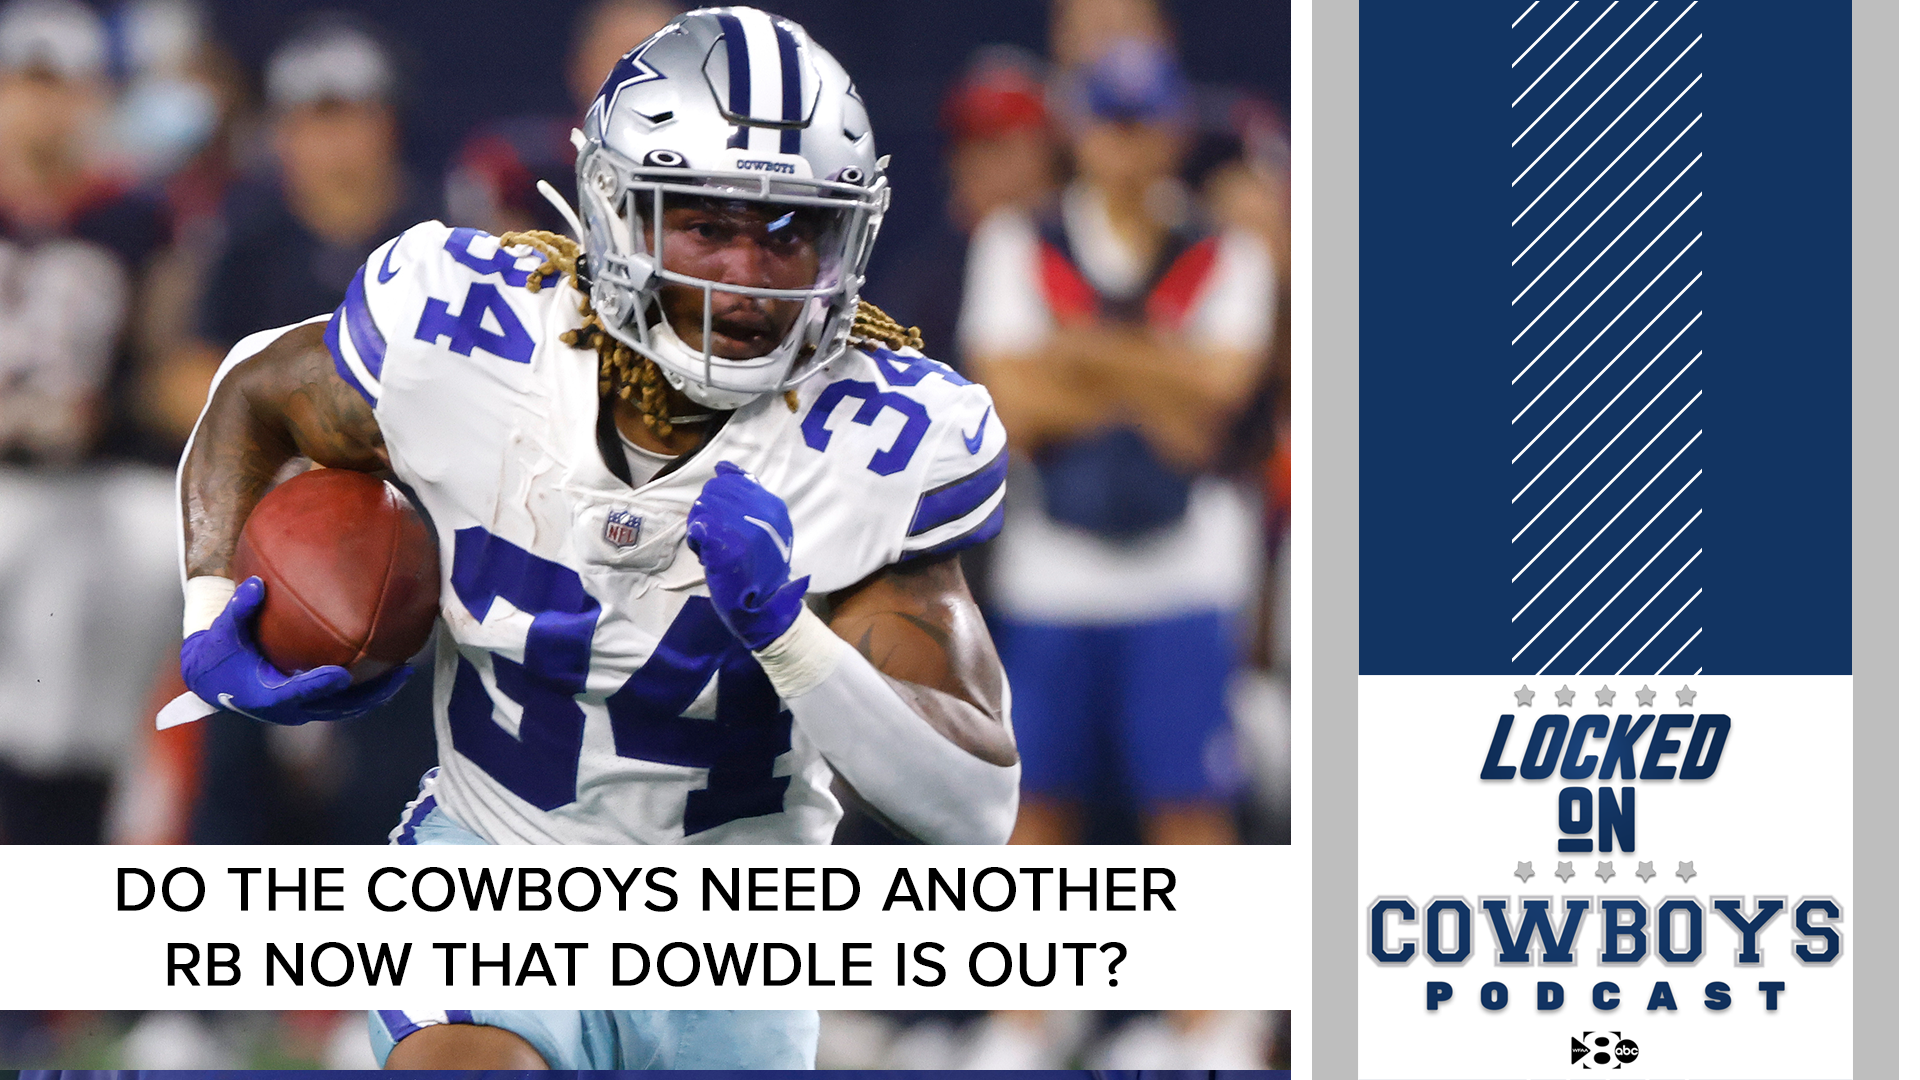 Cowboys RB Rico Dowdle is out for the season. Do they need to pick up someone else? @Marcus_Mosher and @McCoolBCB discuss.